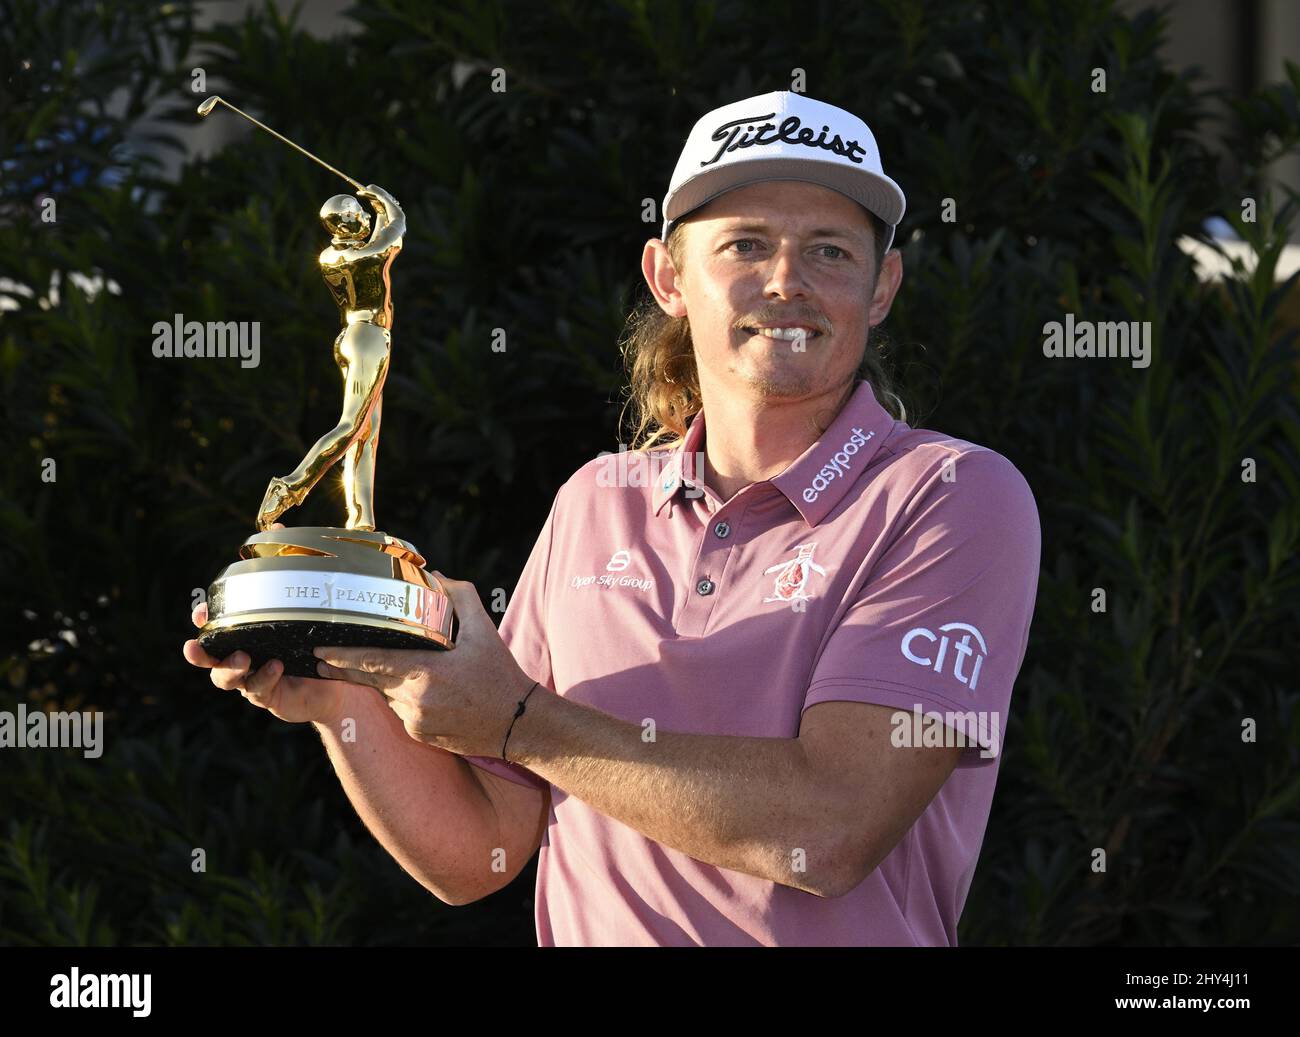 Ponte Vedra Beach, United States. 14th Mar, 2022. Cameron Smith of Australia holds the Gold Man 2022 Players Championship trophy after the final round and winning the 2022 Players PGA Championship on the Stadium Course at TPC Sawgrass in Ponte Vedra Beach, Florida on Monday, March 14, 2022. Smith won the championship with a score of 6 under par. Photo by Joe Marino/UPI Credit: UPI/Alamy Live News Stock Photo